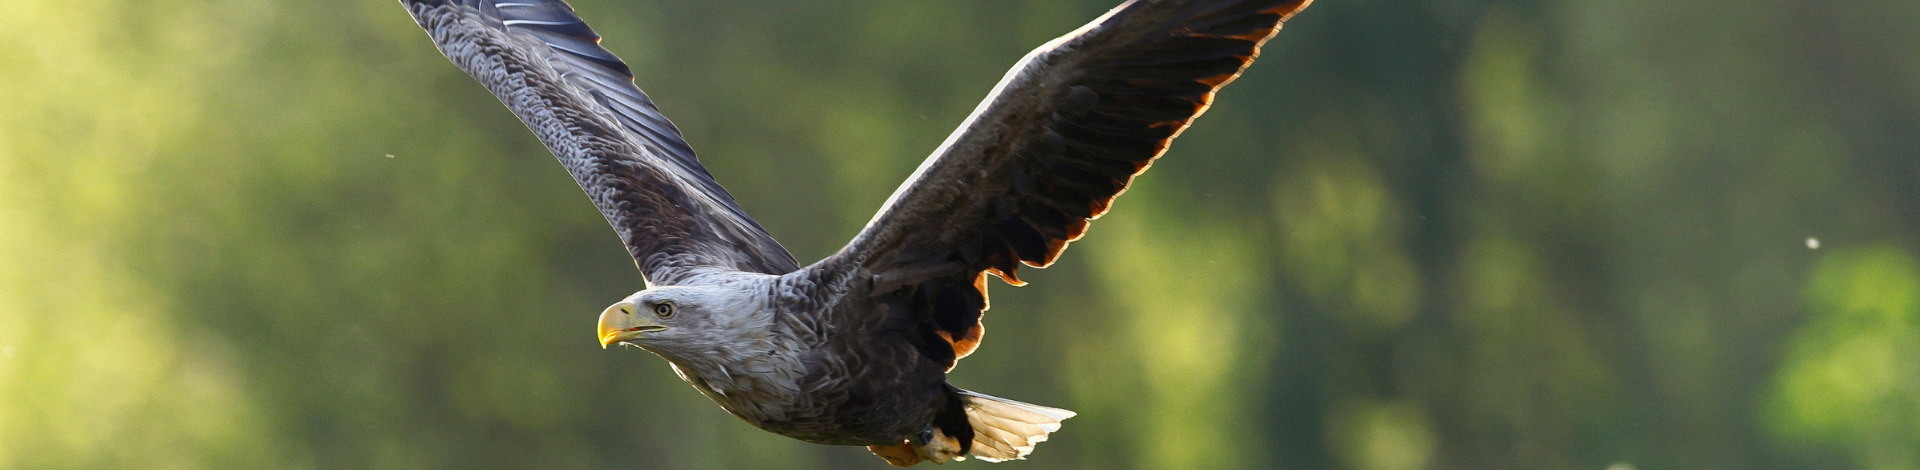 White tailed eagle Ecology sector header banner image